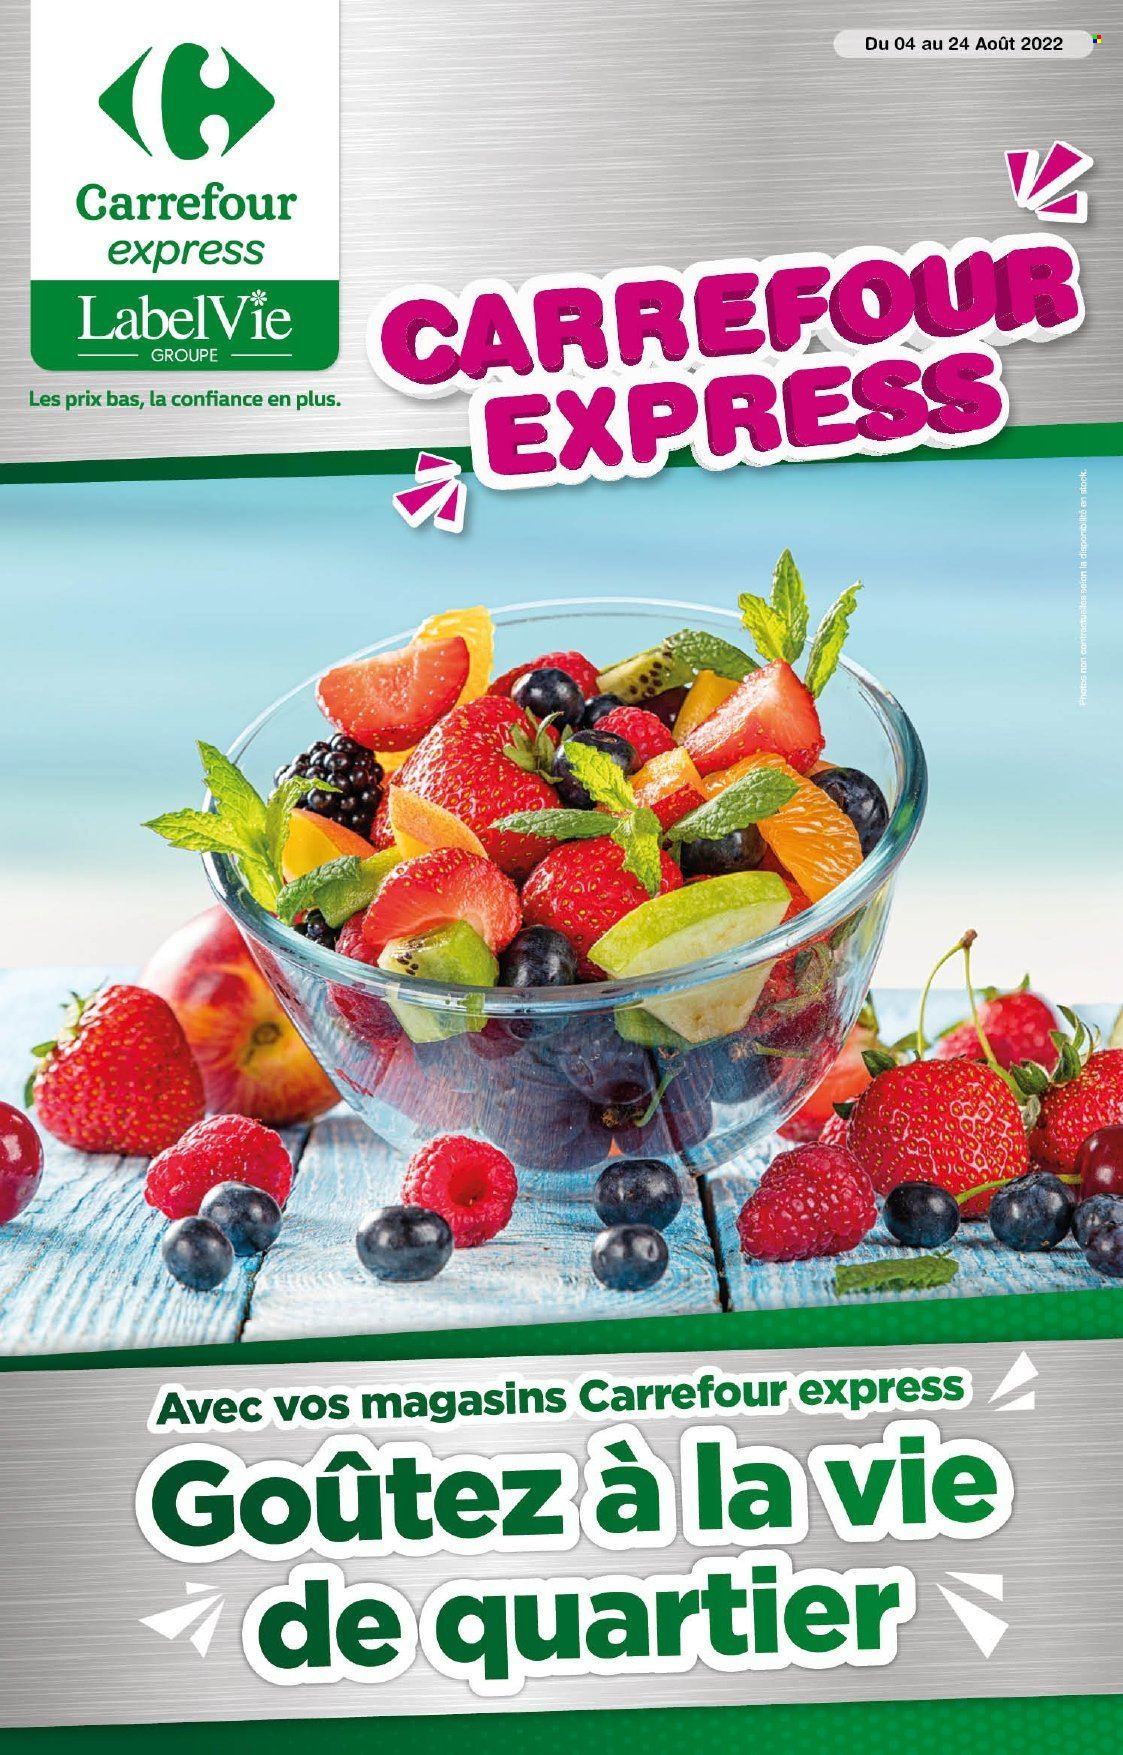 Catalogue Carrefour Express - 04/08/2022 - 24/08/2022. Page 1.